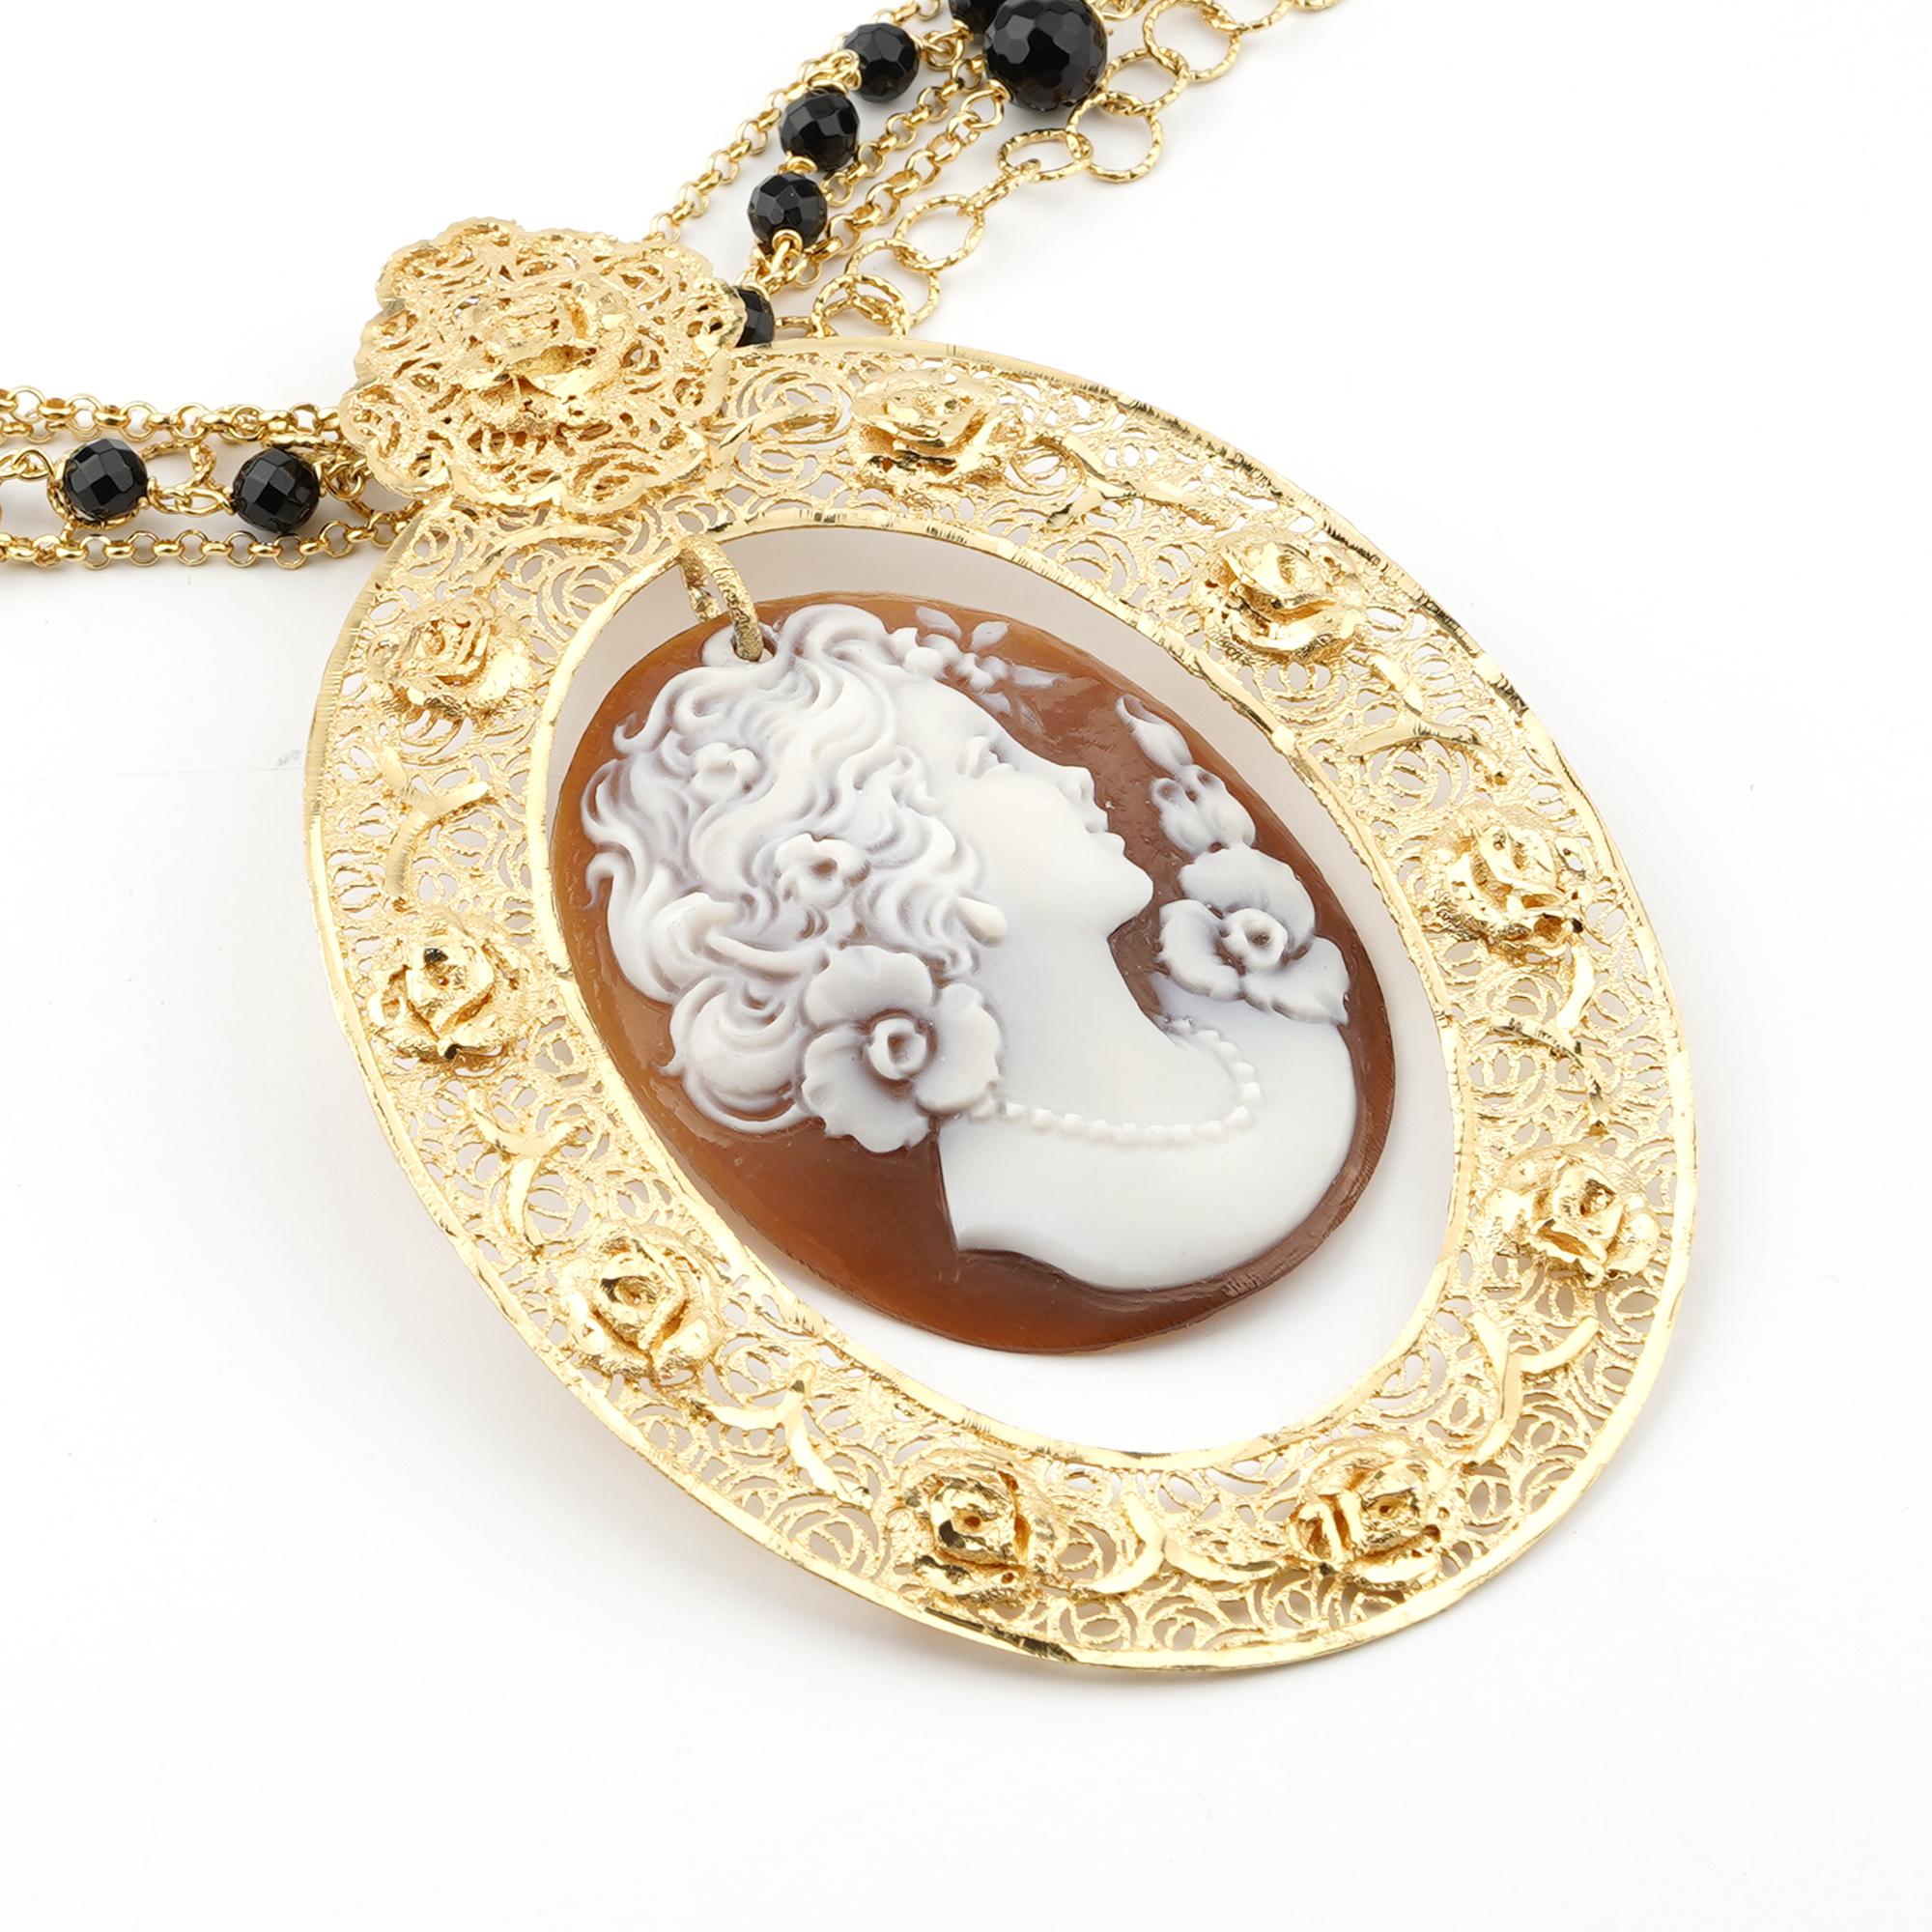 18Kt Gold Plated 925 Sterling Silver Sea Shell 45mm Cameo Necklace 95cm. Fully handcarved Portrait on a sea shell cameo set in a 18kt Gold plated silver pendant necklace with black onyx. Carvings are performed by our master artisans with generations